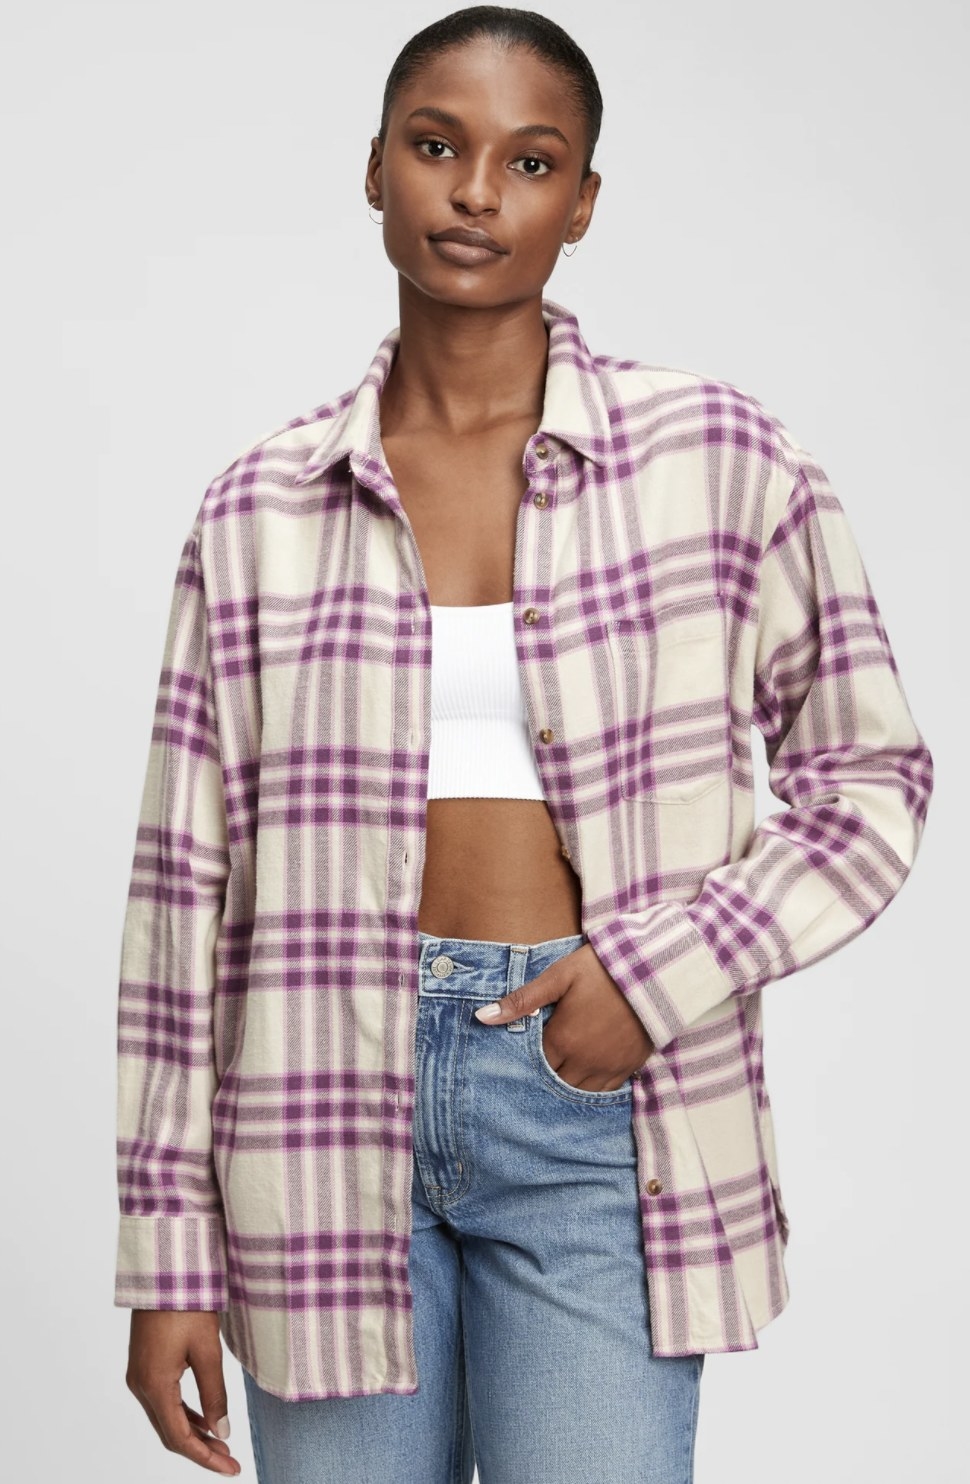 model wearing the flannel in white and purple